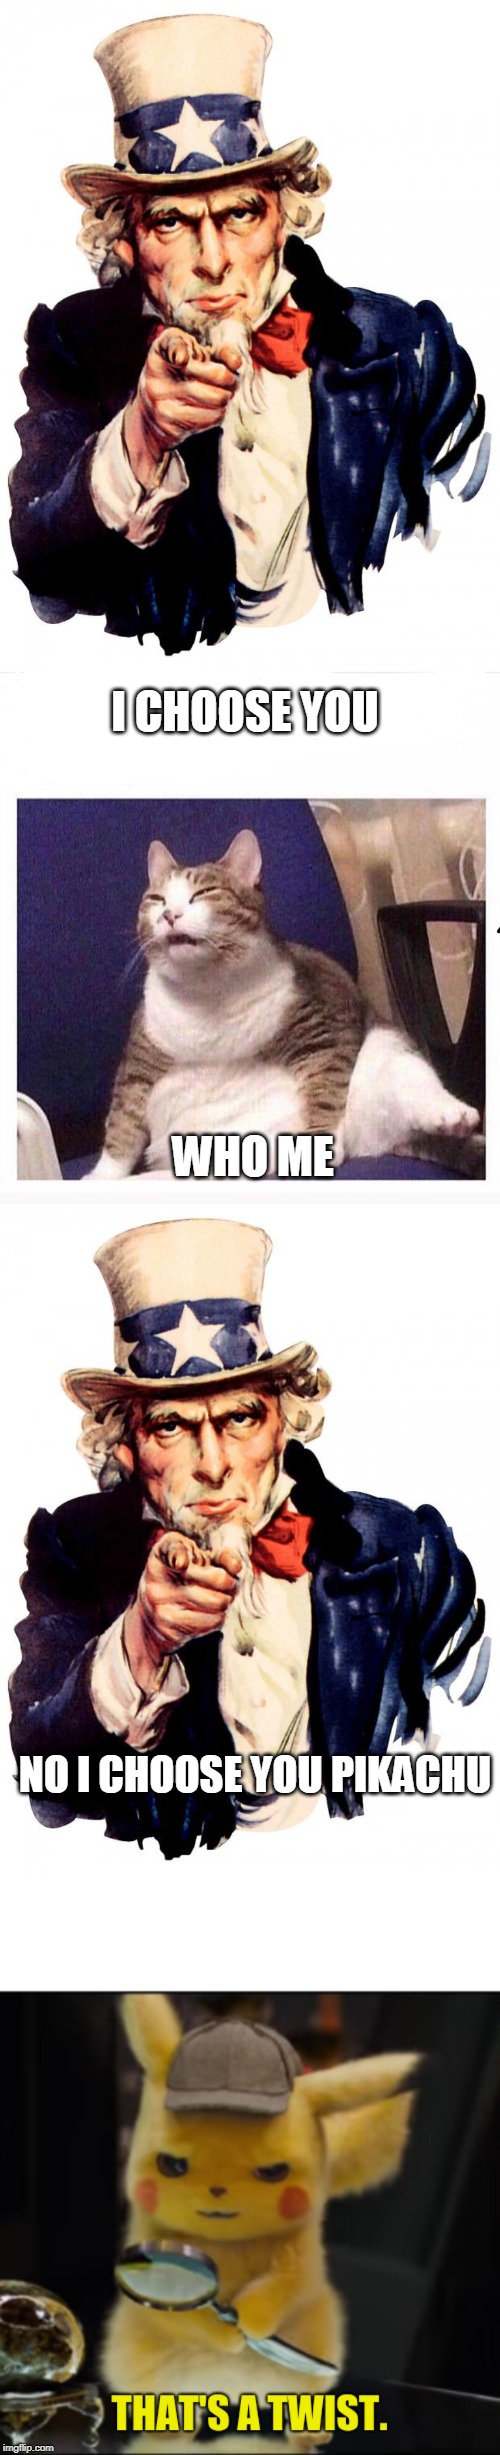 I CHOOSE YOU; WHO ME; NO I CHOOSE YOU PIKACHU | image tagged in memes,uncle sam,that's a twist,confused fat cat | made w/ Imgflip meme maker